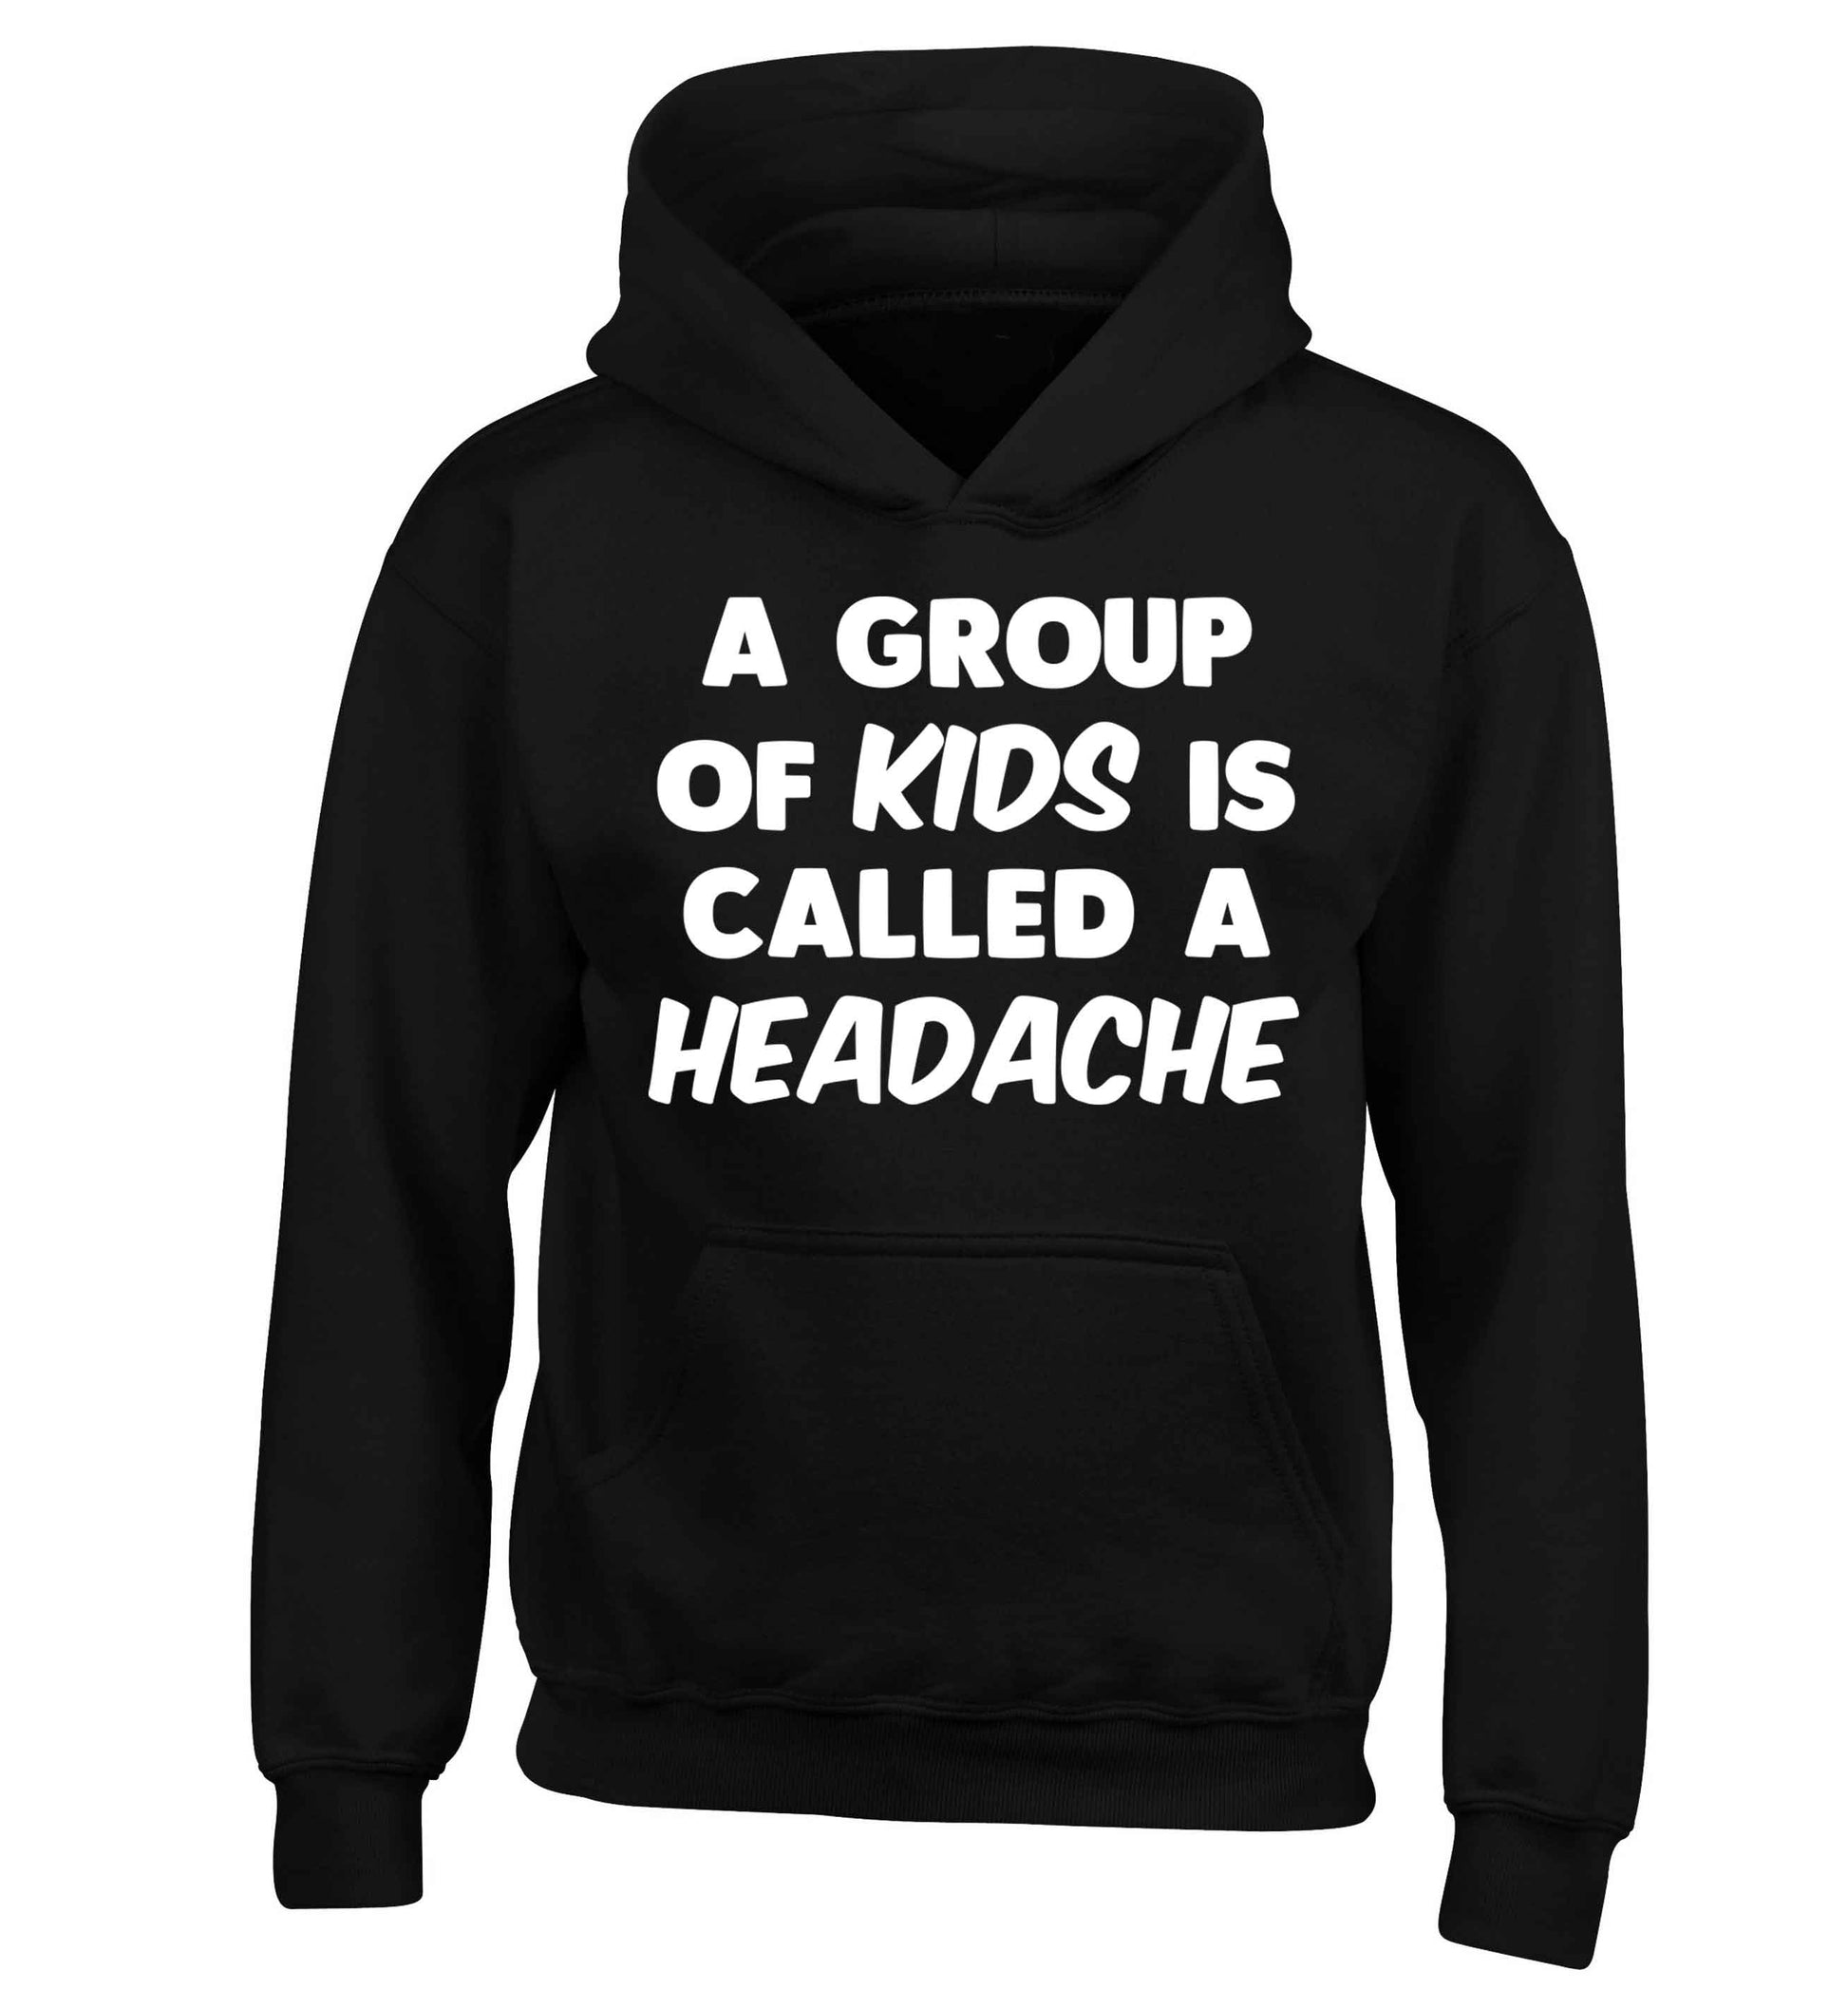 A group of kids is called a headache children's black hoodie 12-13 Years